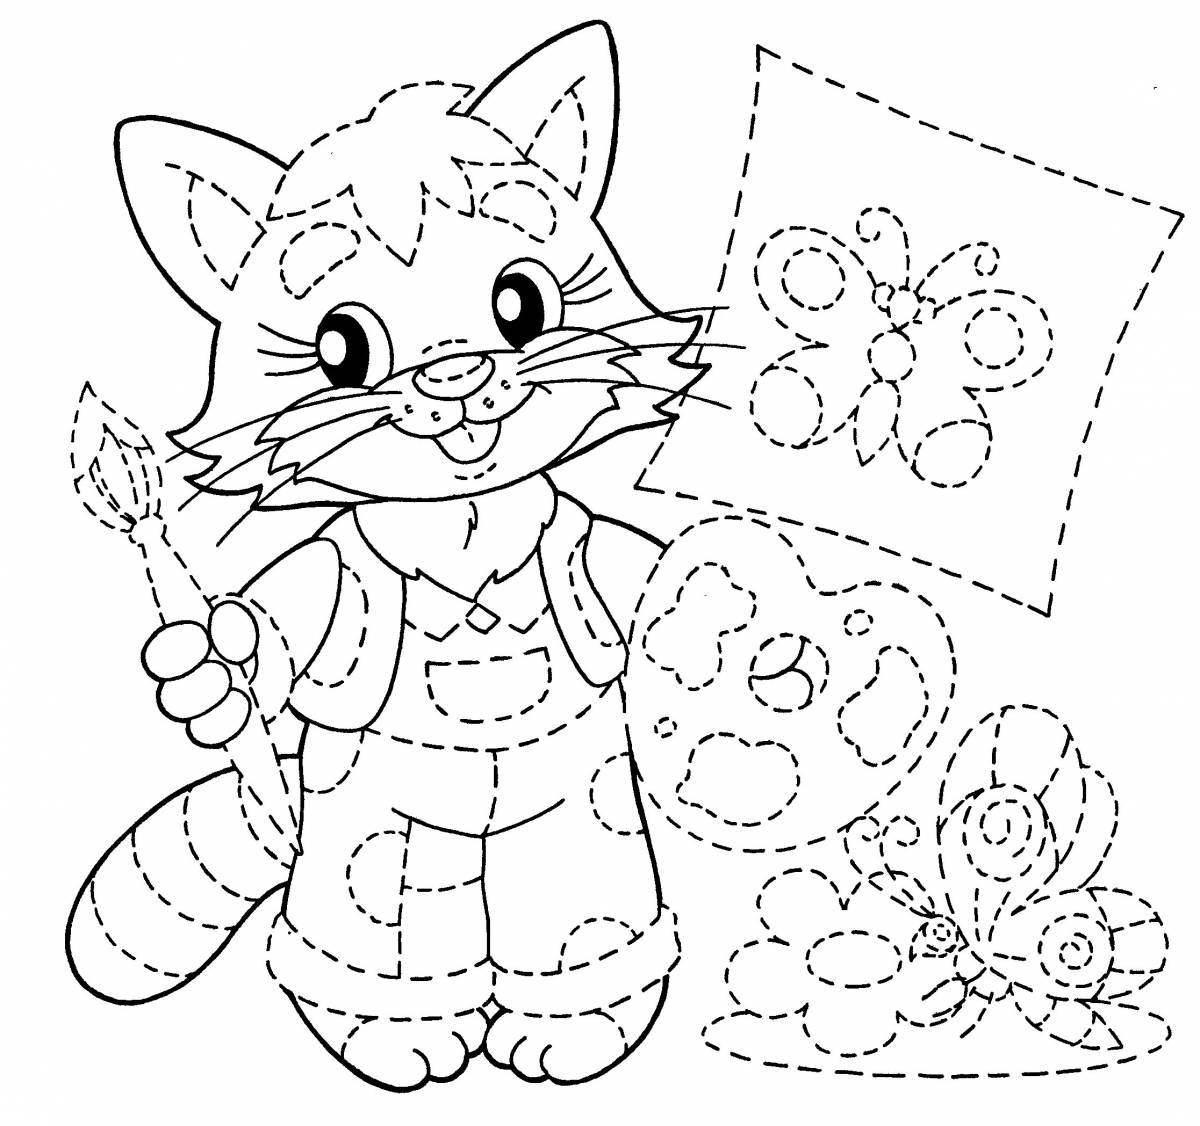 Creative coloring book for children aged 6 7